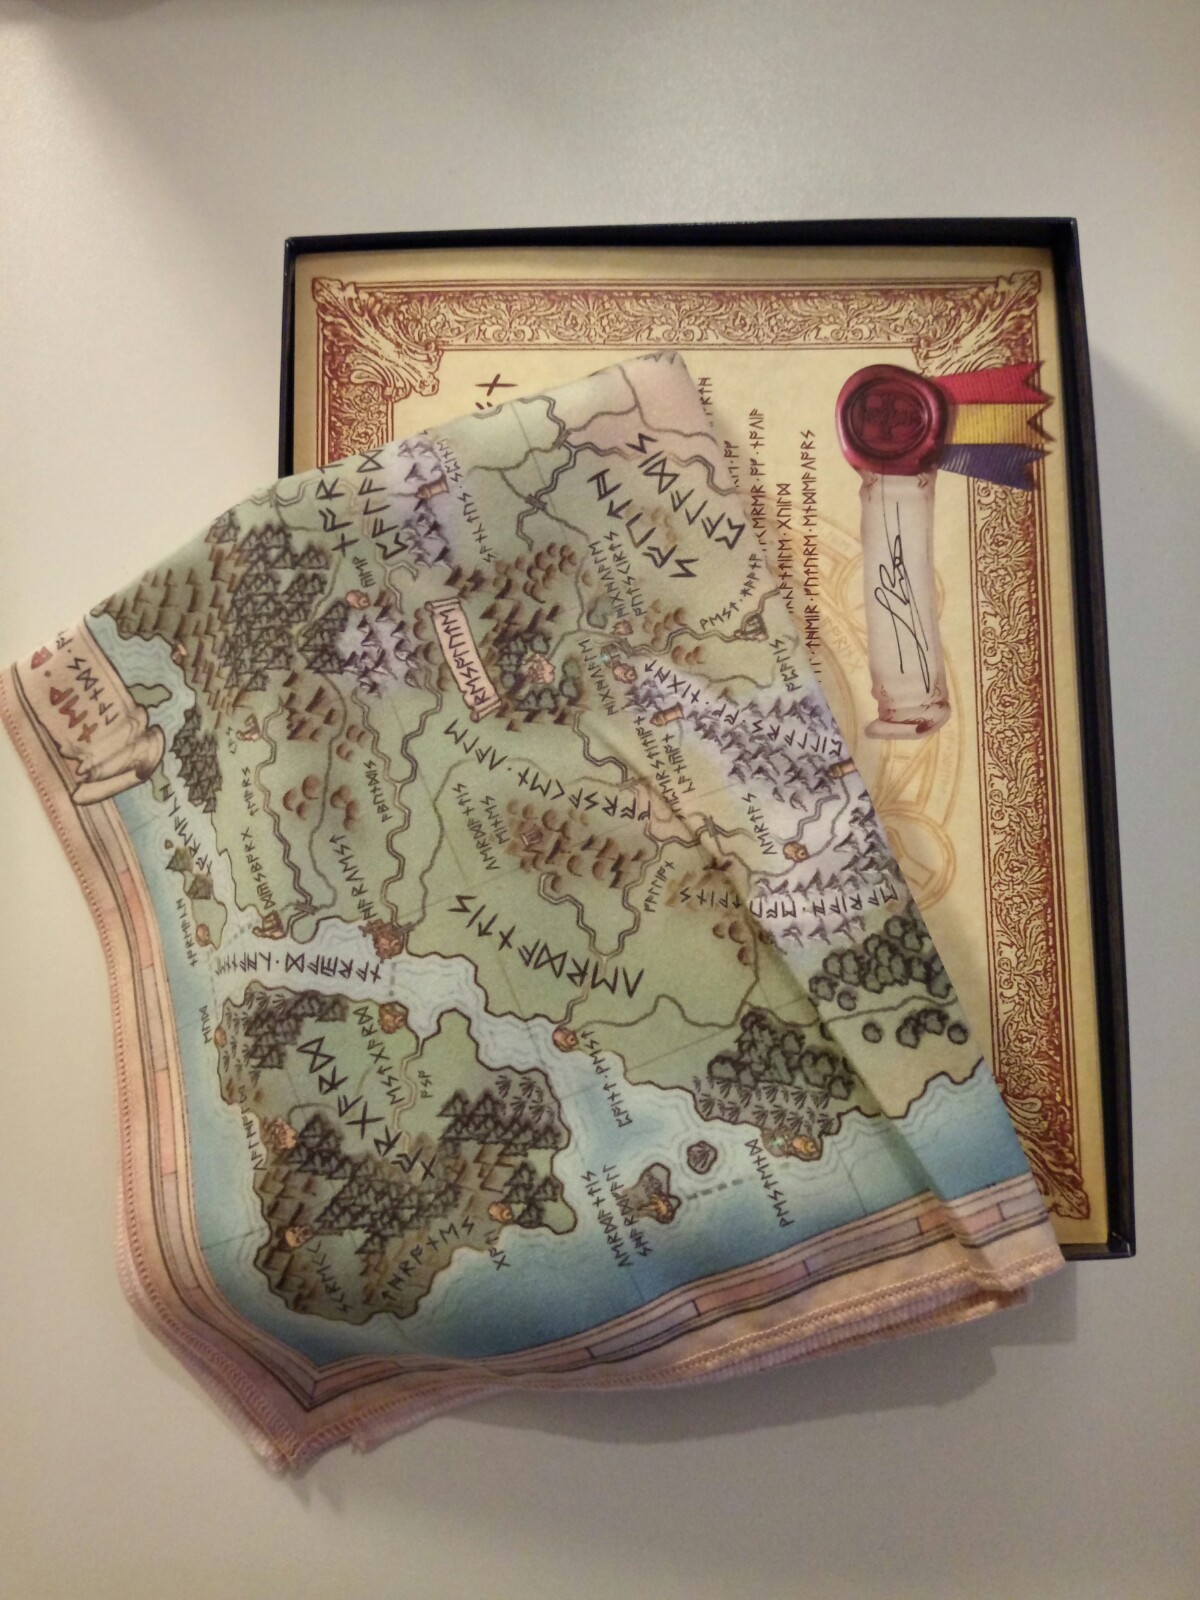 Opened game box, with map visible inside